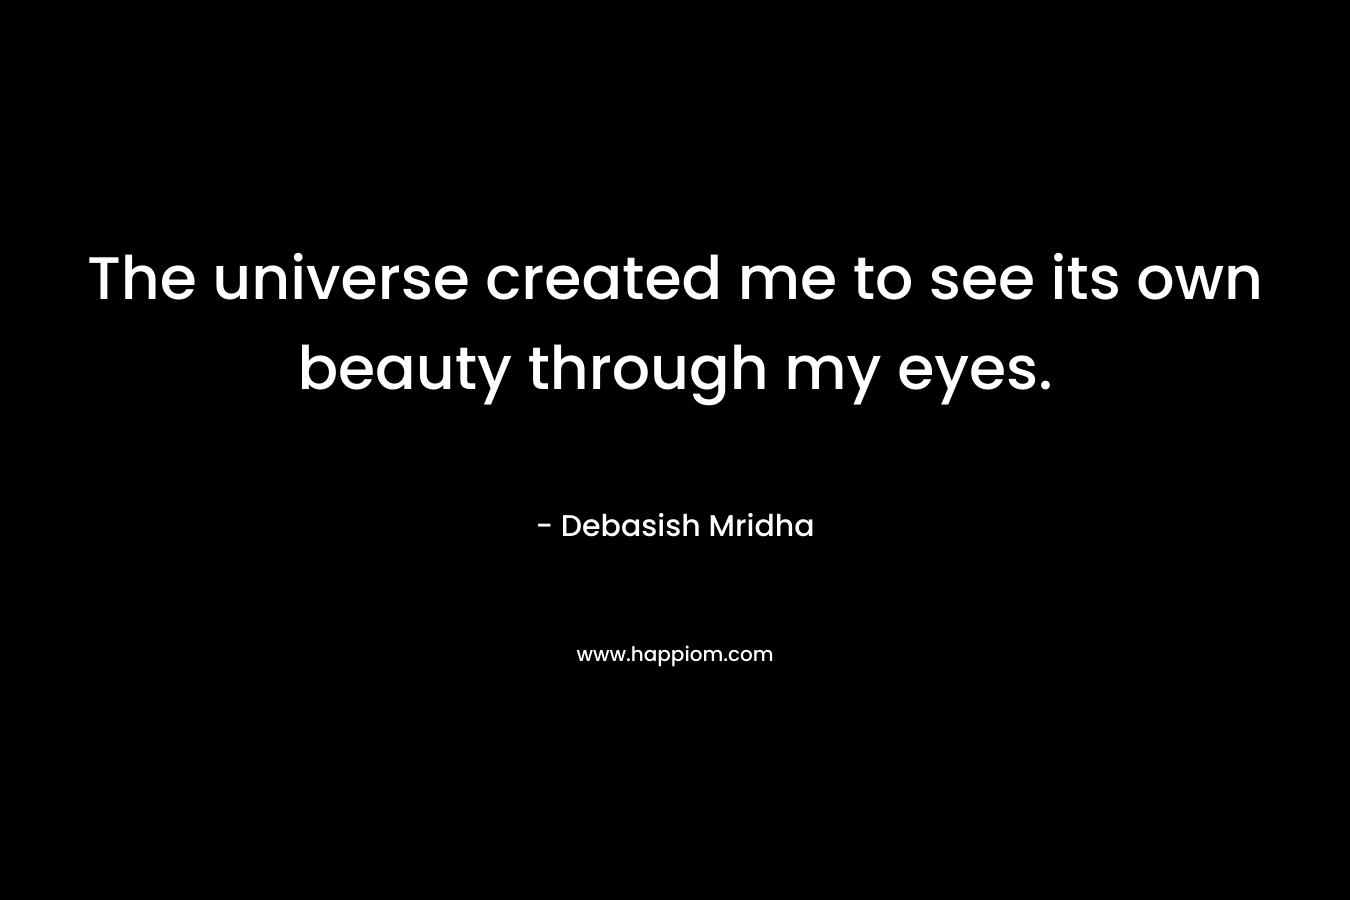 The universe created me to see its own beauty through my eyes.